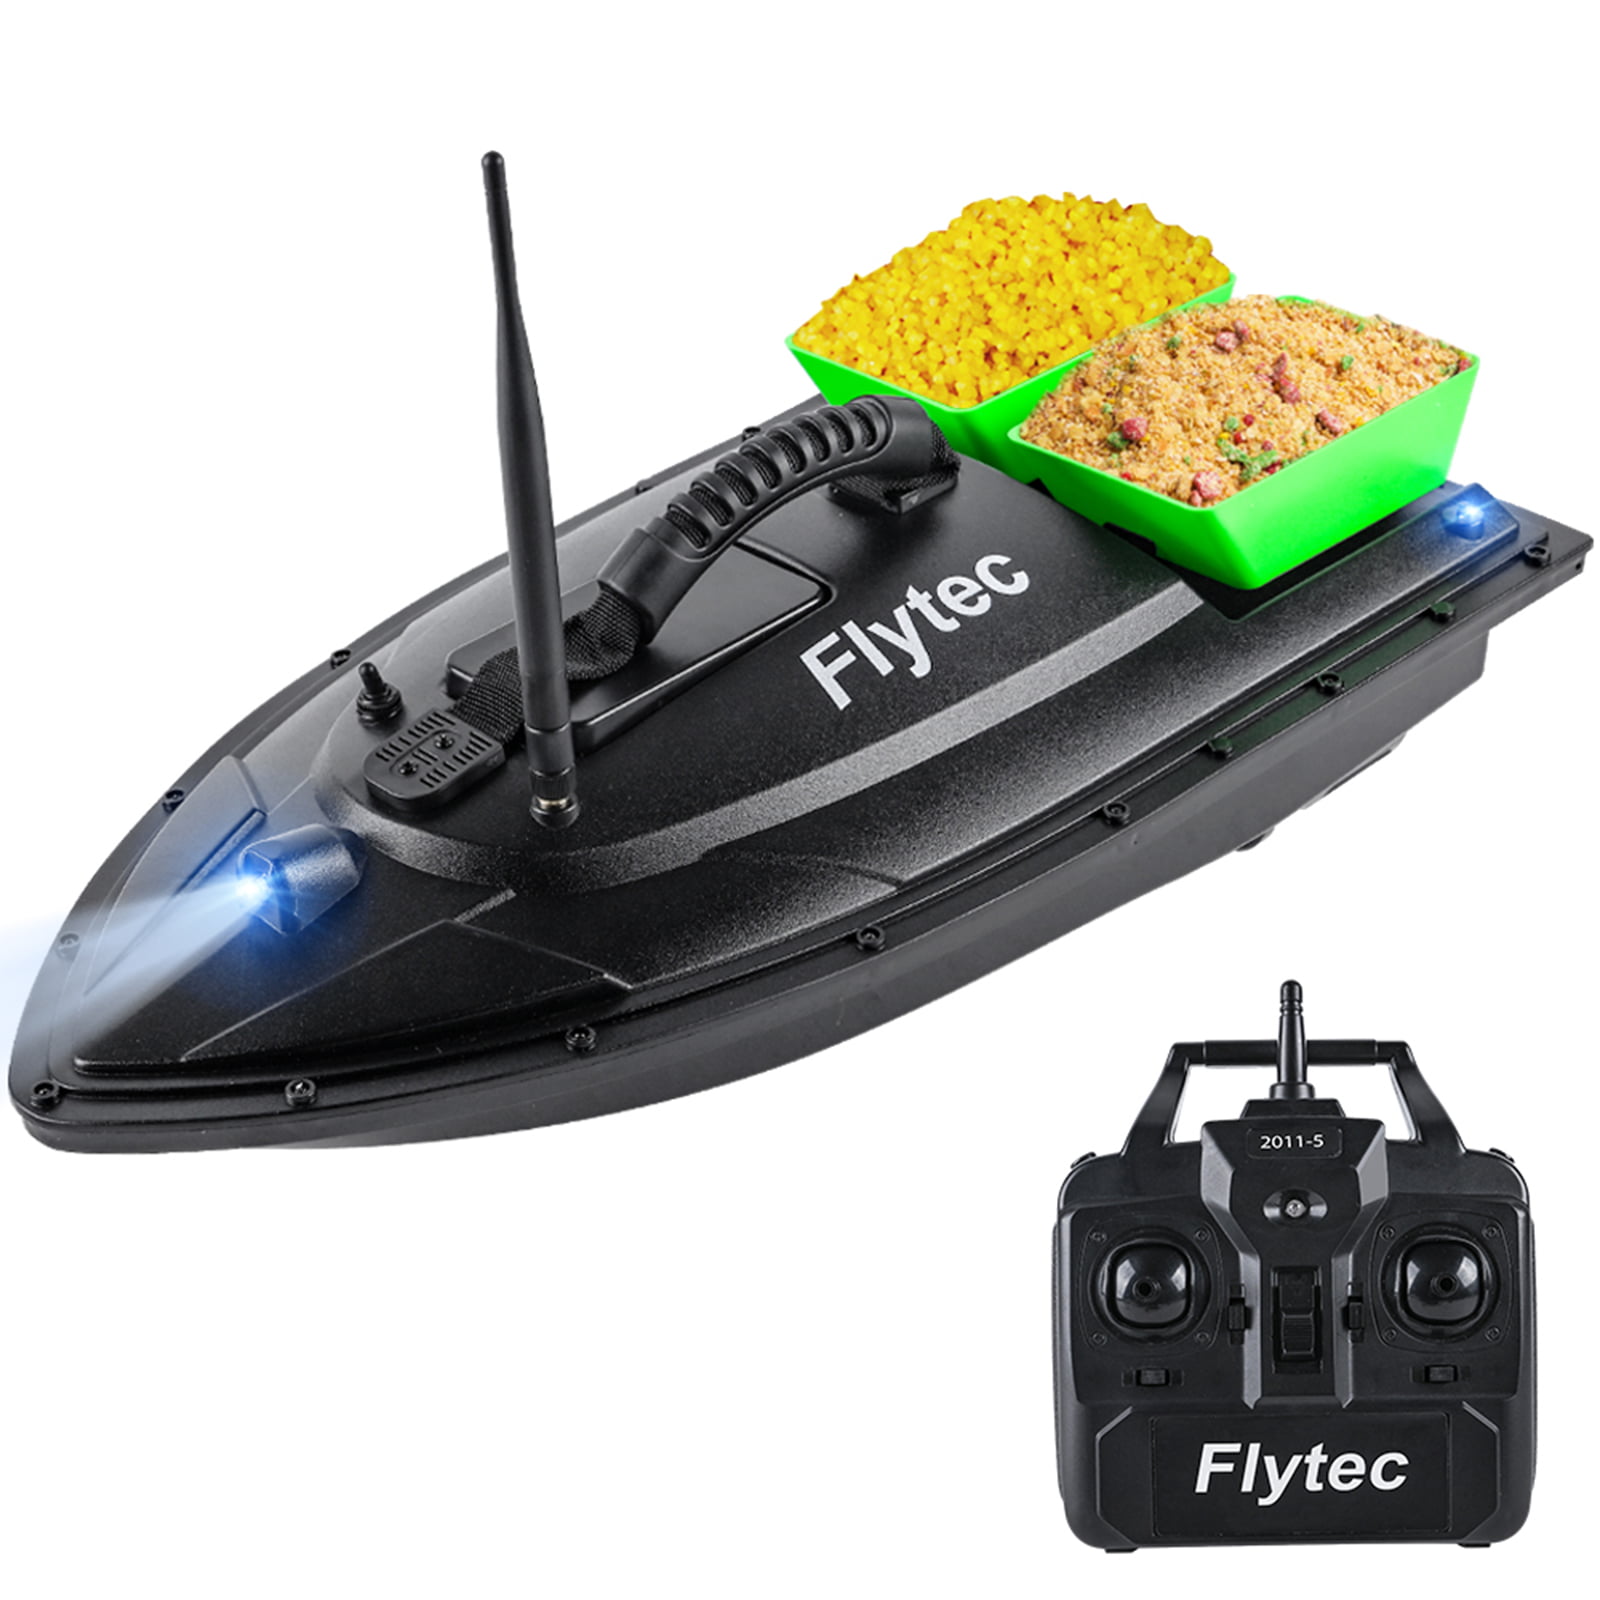 Battery Compartment Cover for Flytec 2011-5 Intelligent Bait Throwing Nest Boat 